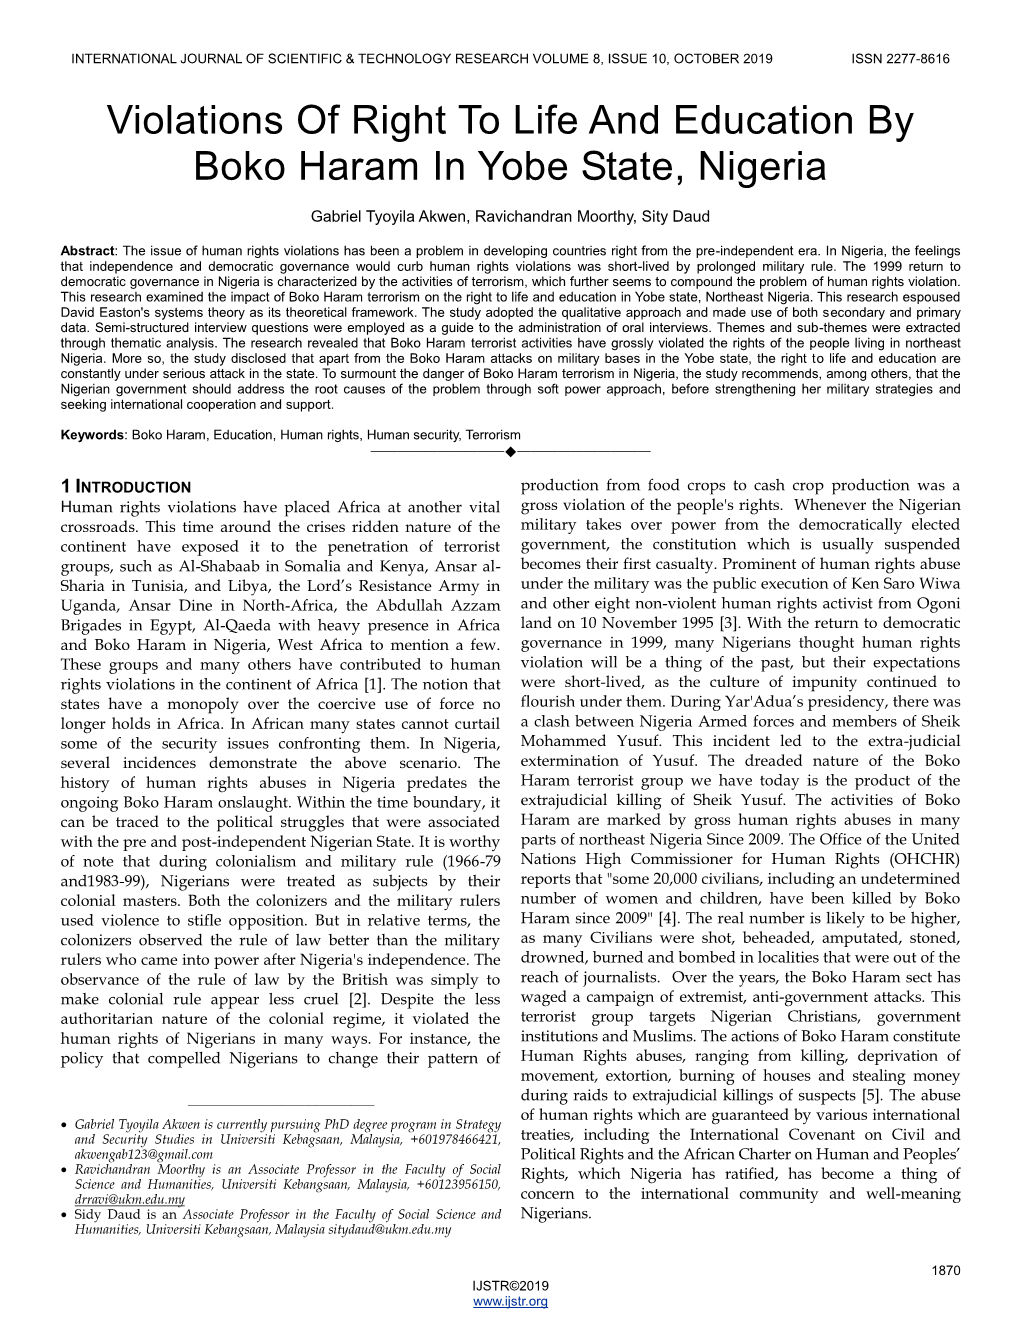 Violations of Right to Life and Education by Boko Haram in Yobe State, Nigeria